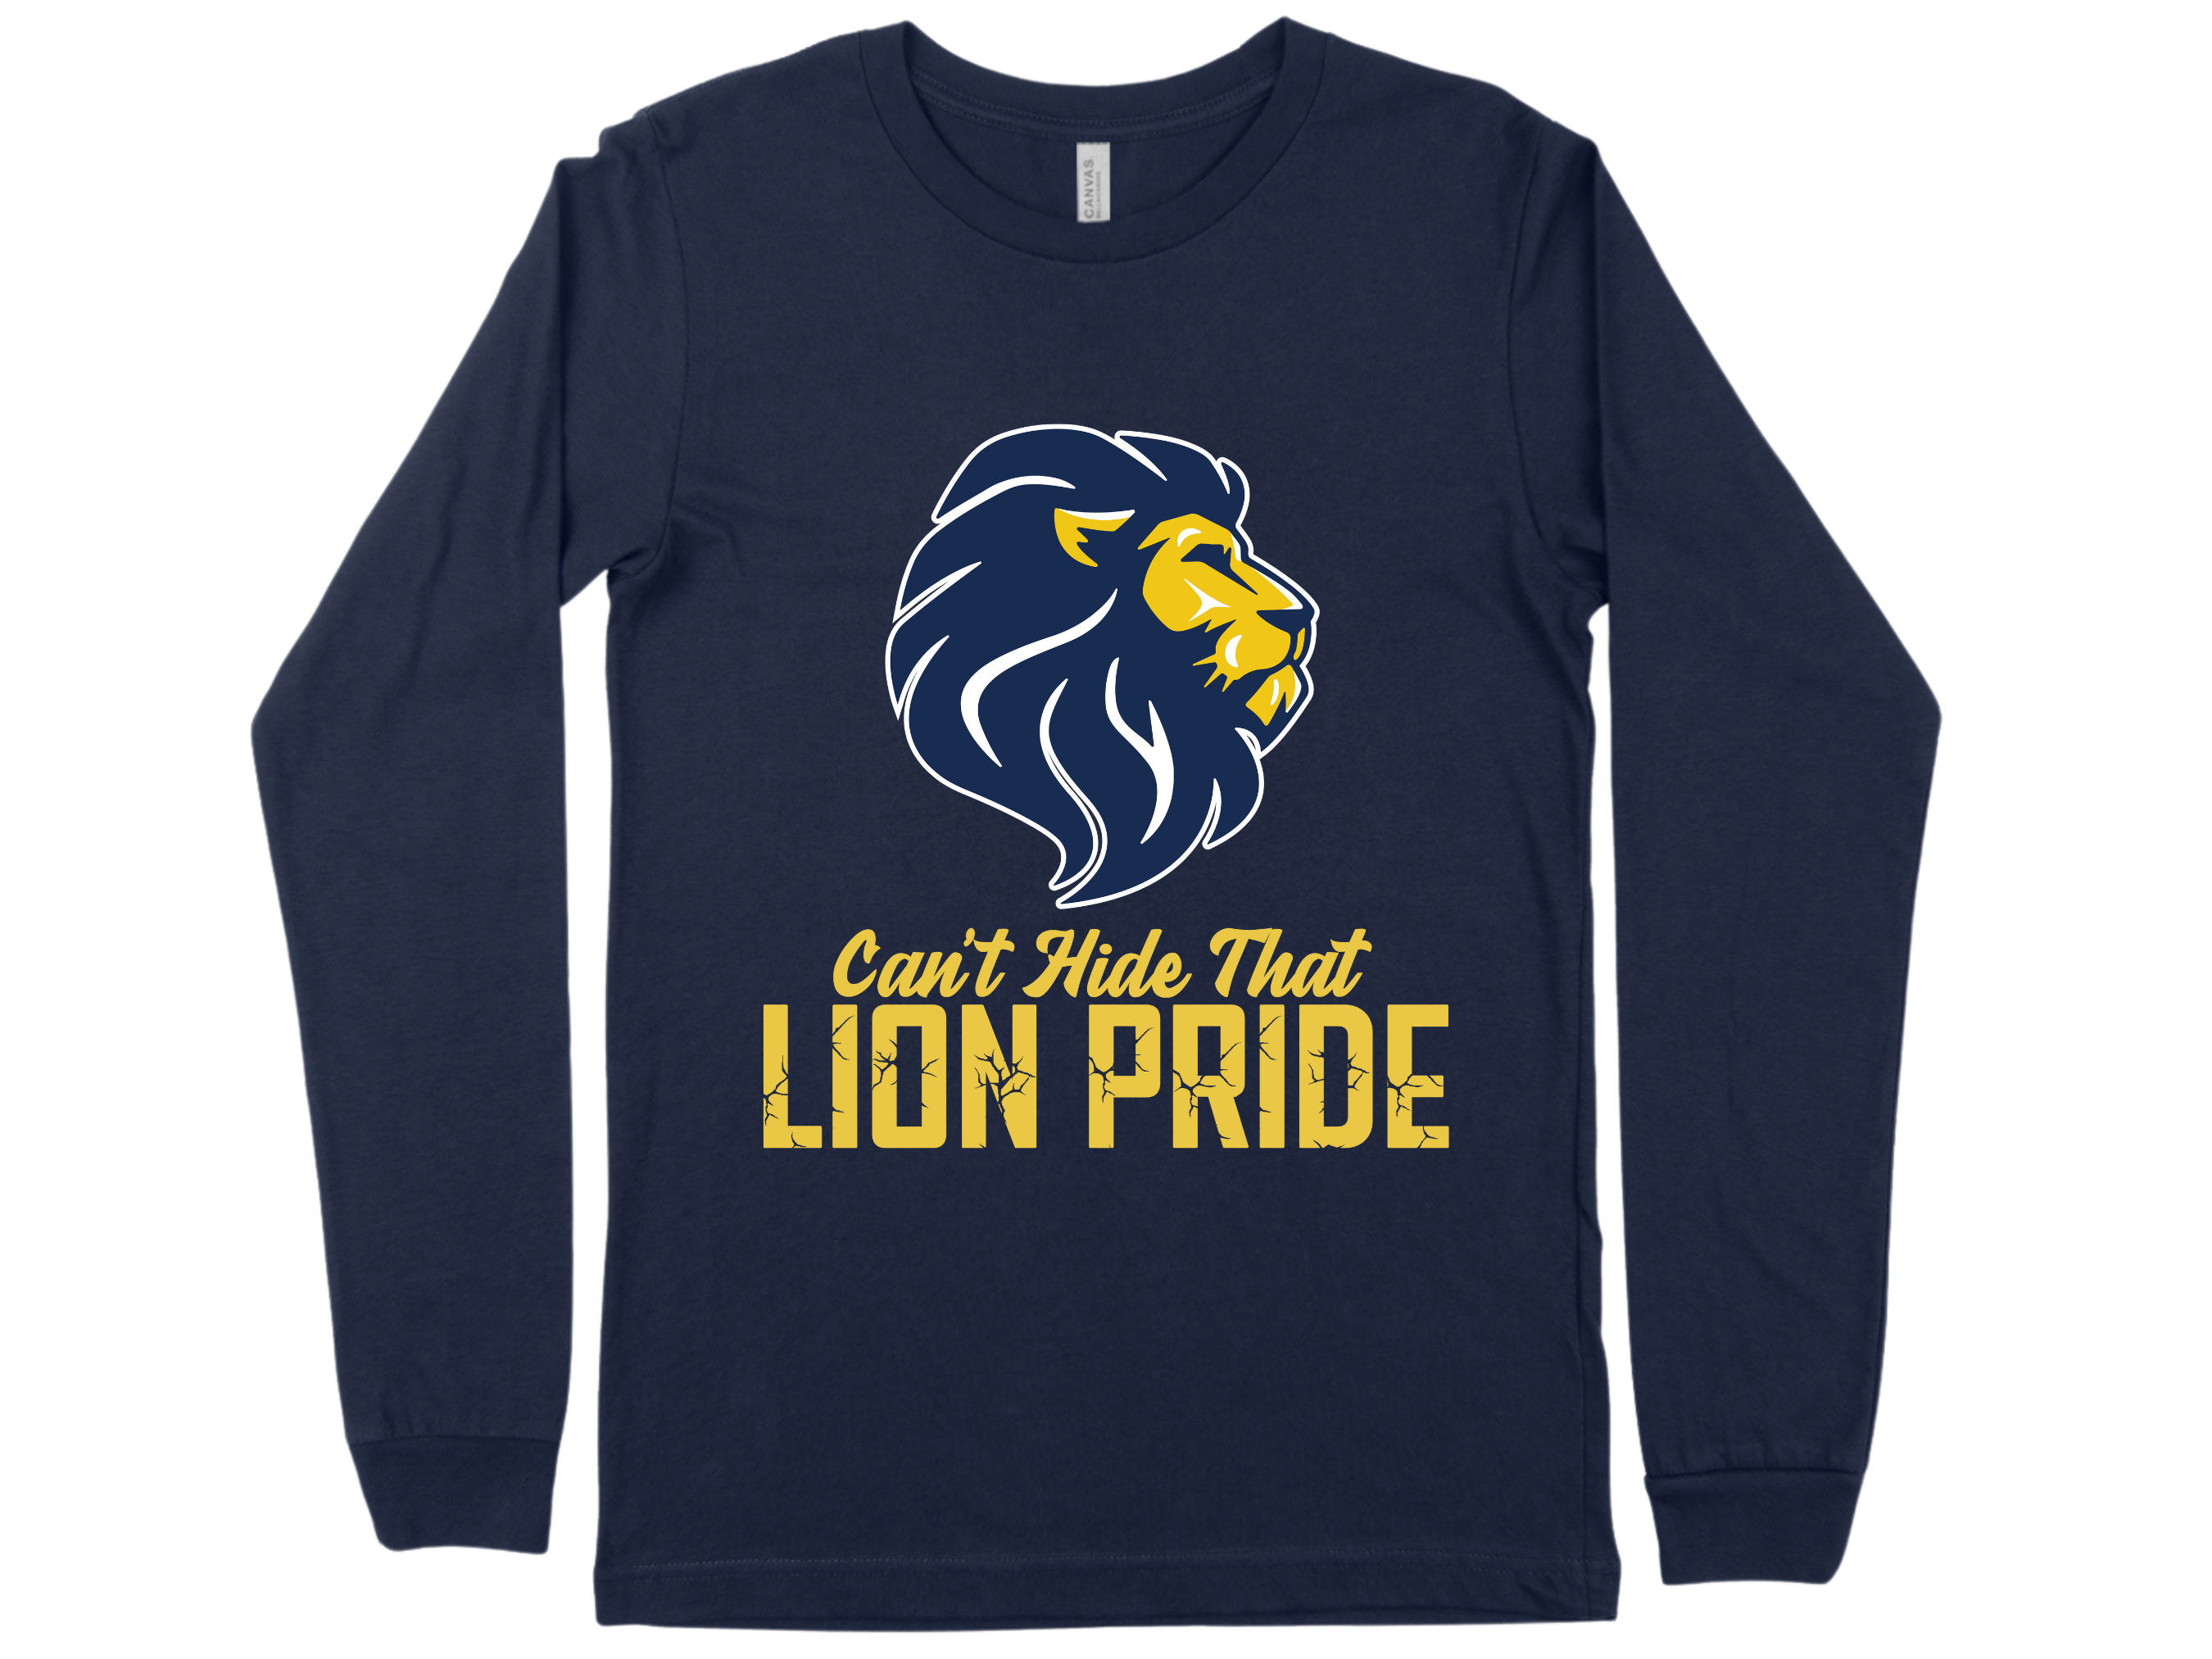 Can't Hide that Lion Pride - Navy Long Sleeve  Large Image